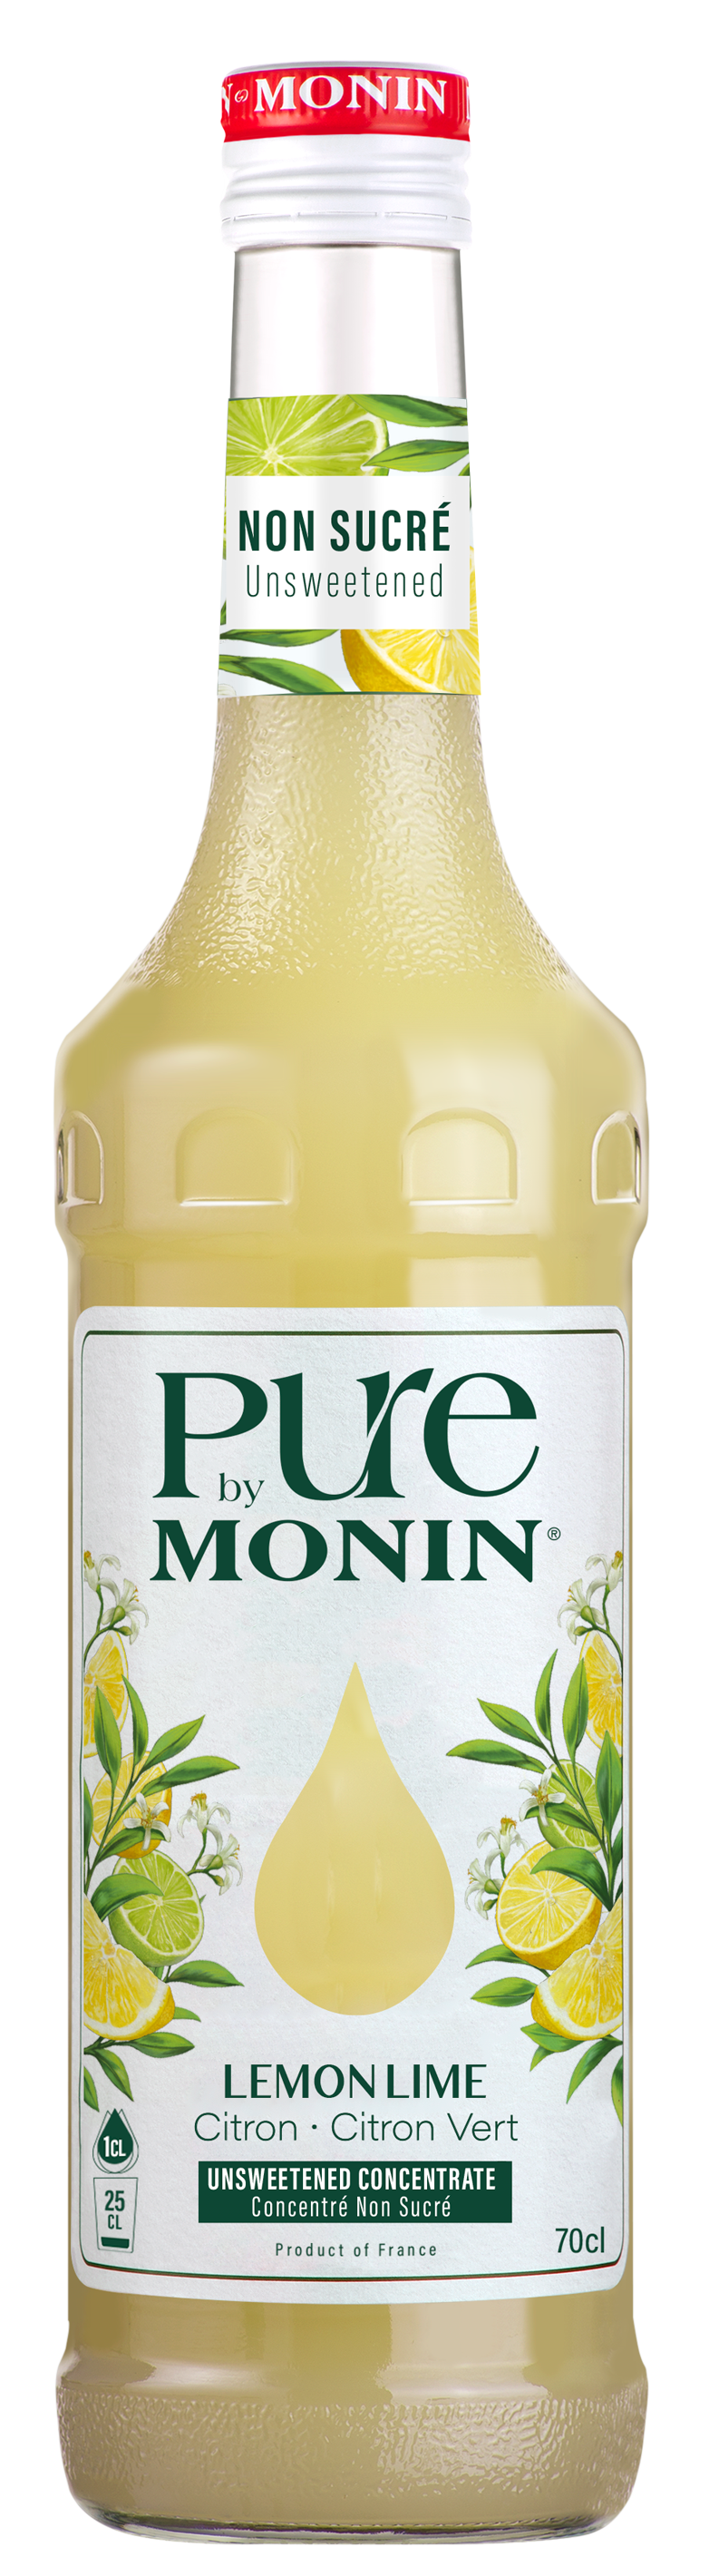 PURE by MONIN Lemon Lime sugar-free concentrate